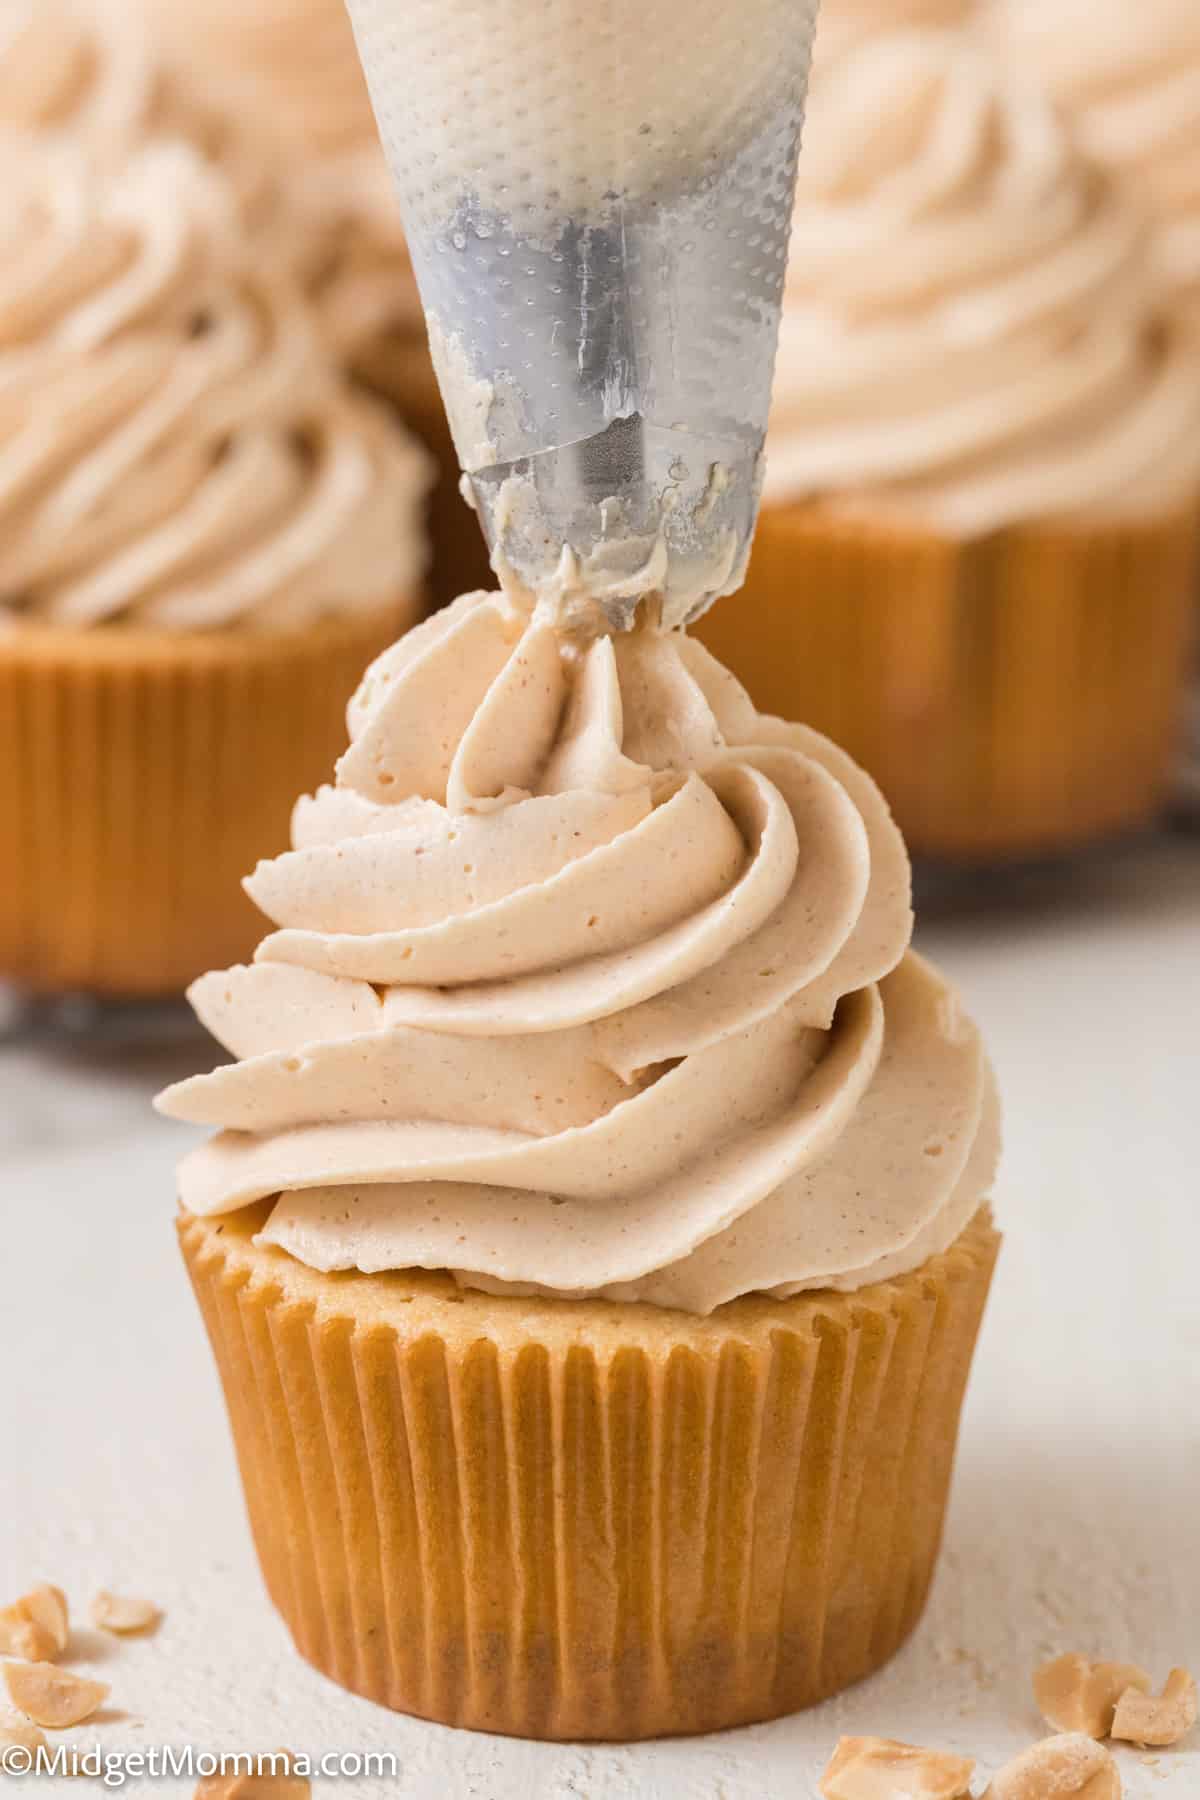 Peanut butter buttercream frosting being piped onto a cupcake